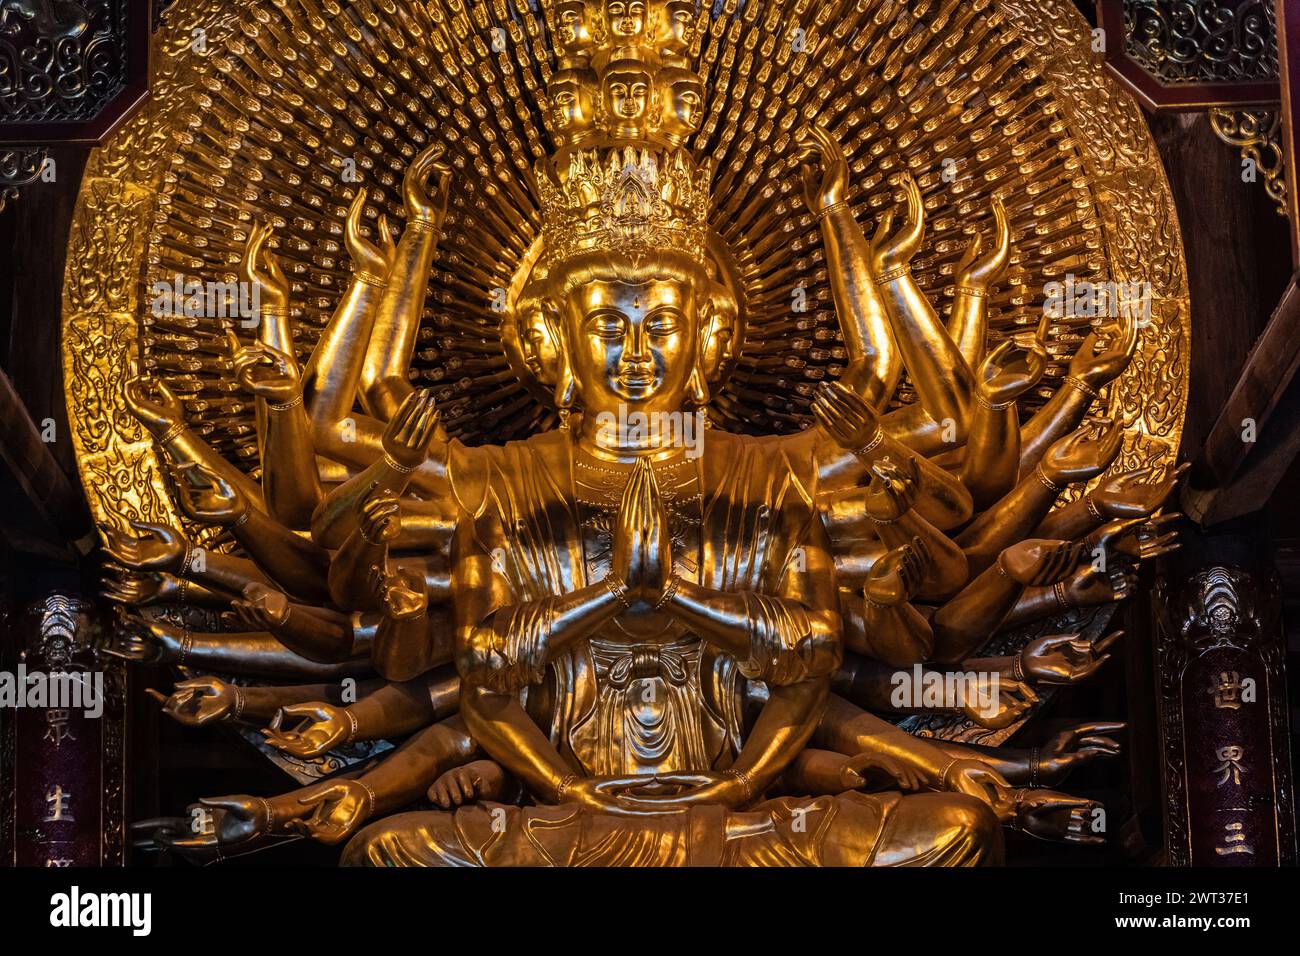 Large, ornate, gold Buddha statue with multiple arms in the Bai Dinh Pagoda temple complex, Trang An, Ninh Binh province, northern Vietnam. Stock Photo